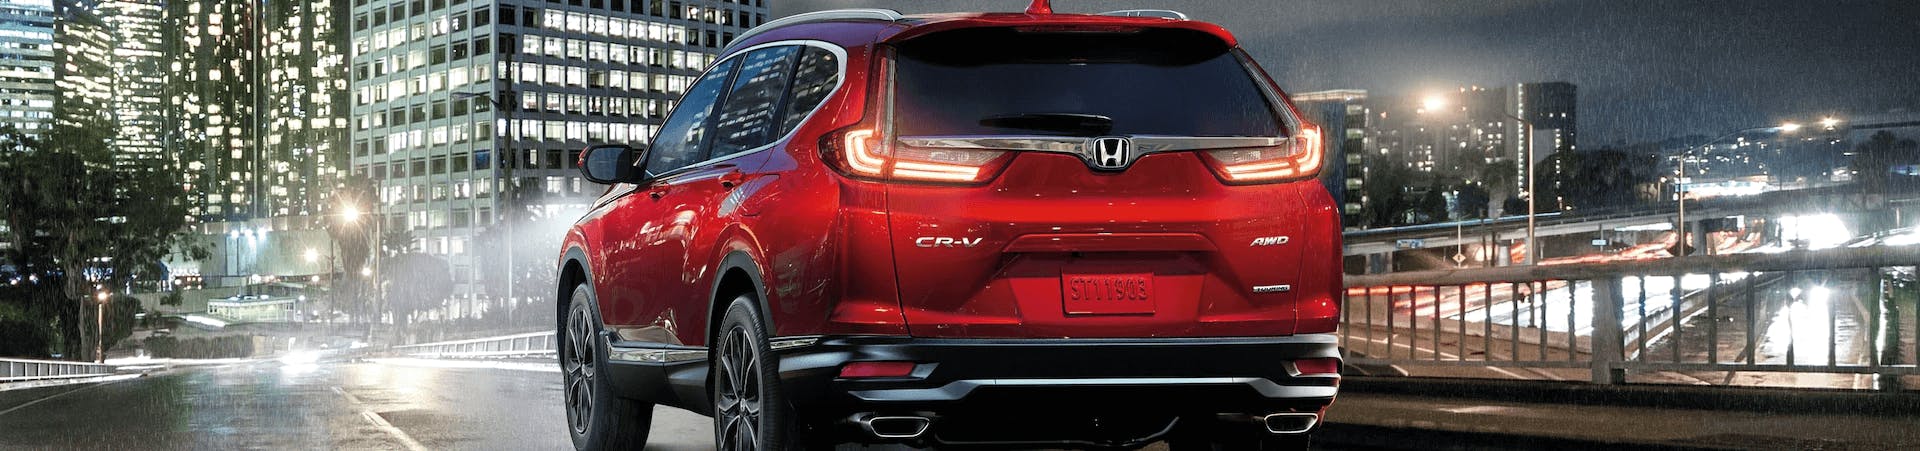 red honda cr-v - rear view - background/footer image